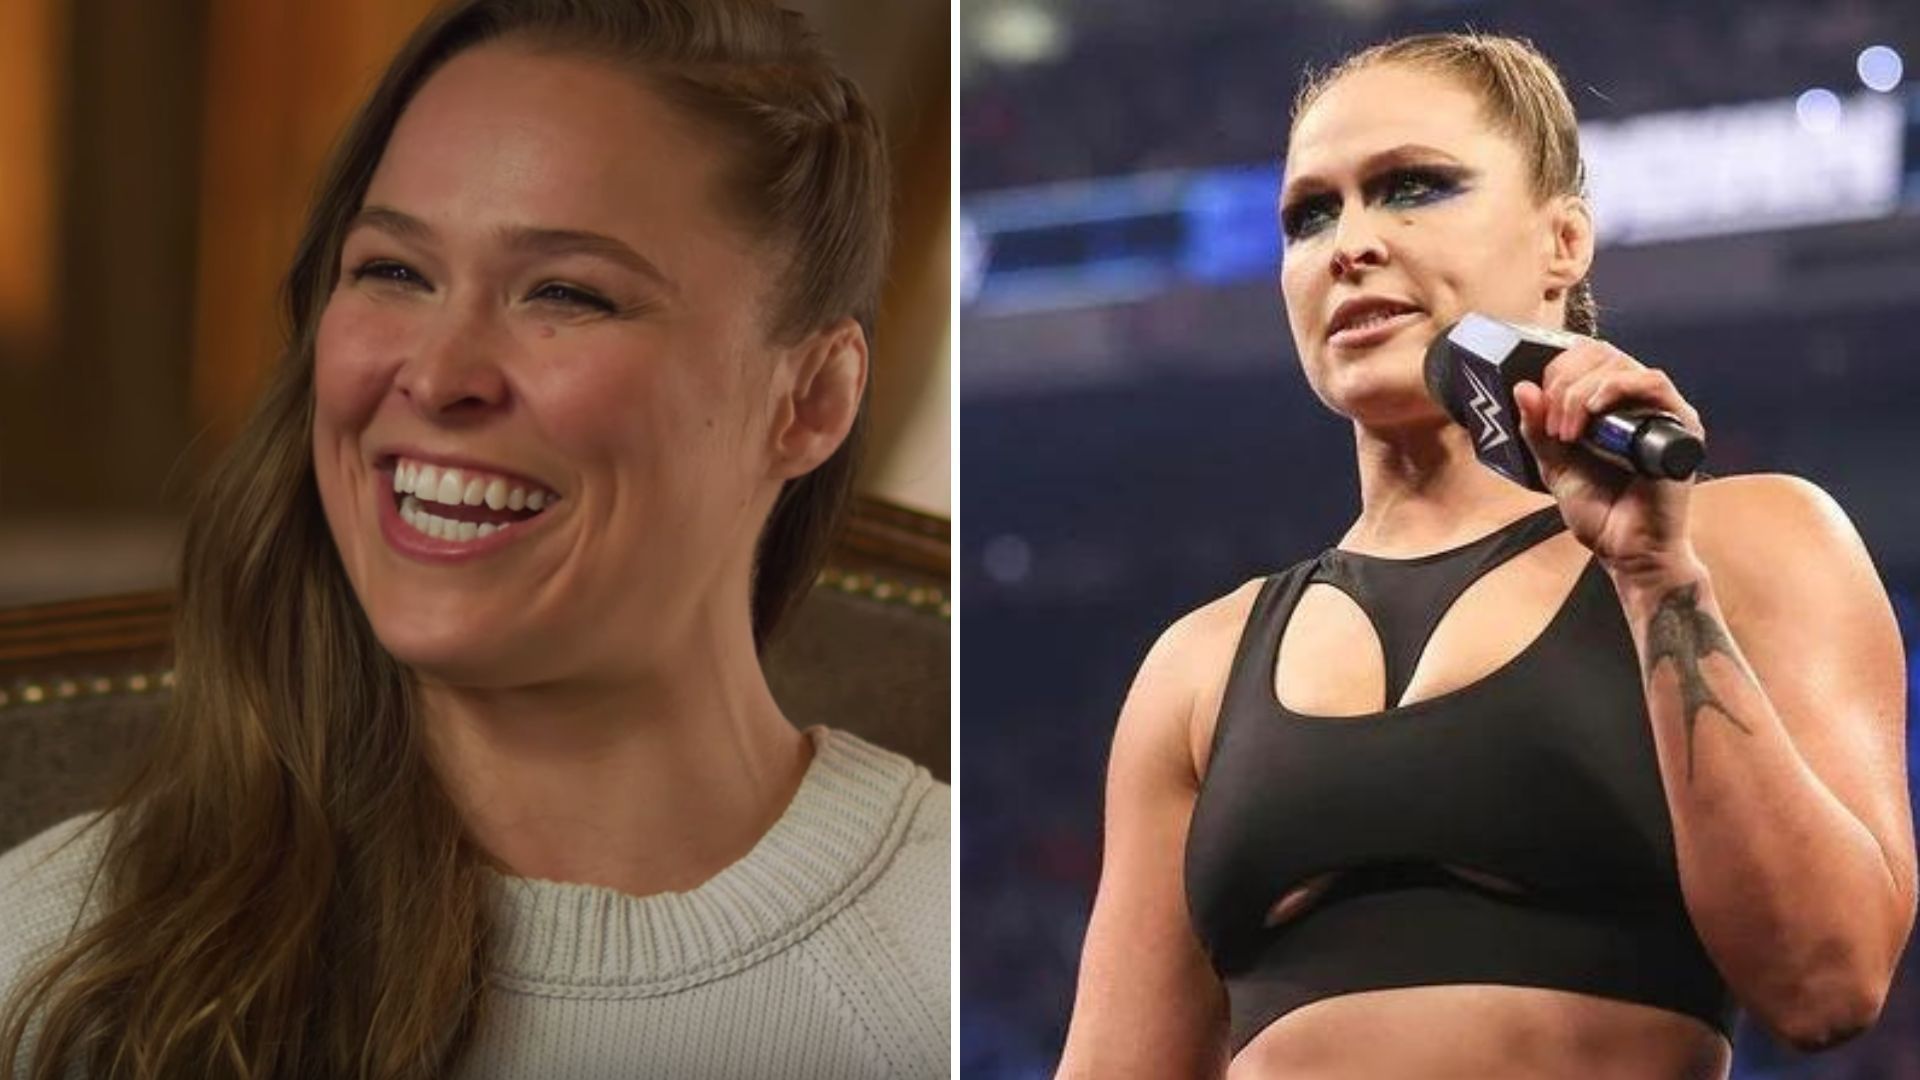 Rousey last competed at SummerSlam.